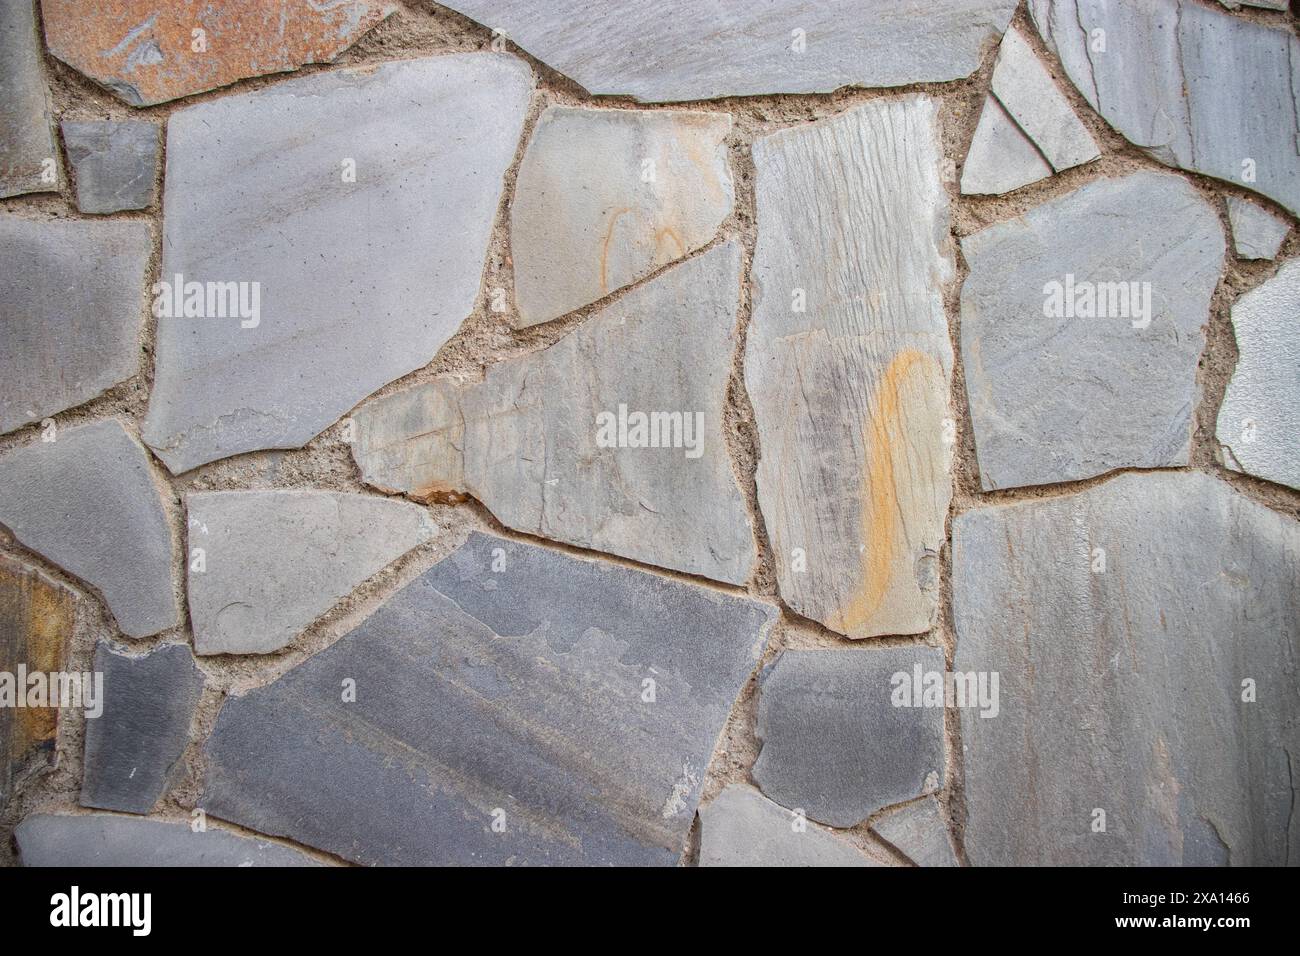 Close up Photograph of a Textured, Patterned wall on the facade of a historic buildung in El Papiol, Spain Stock Photo